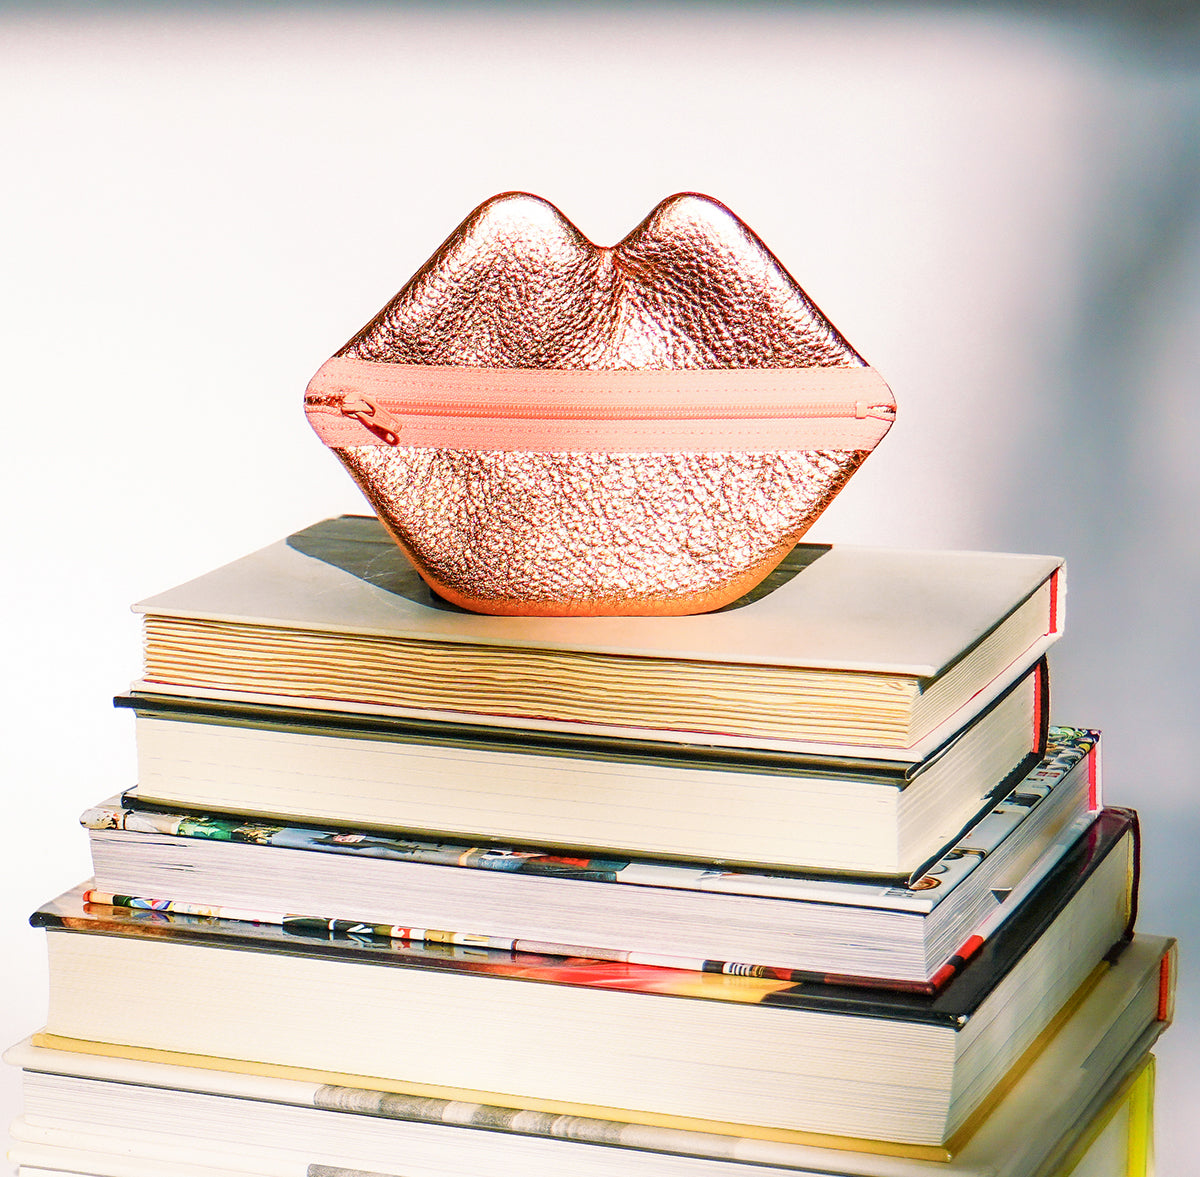 Lip Zip pouch sitting on top of a stack of books